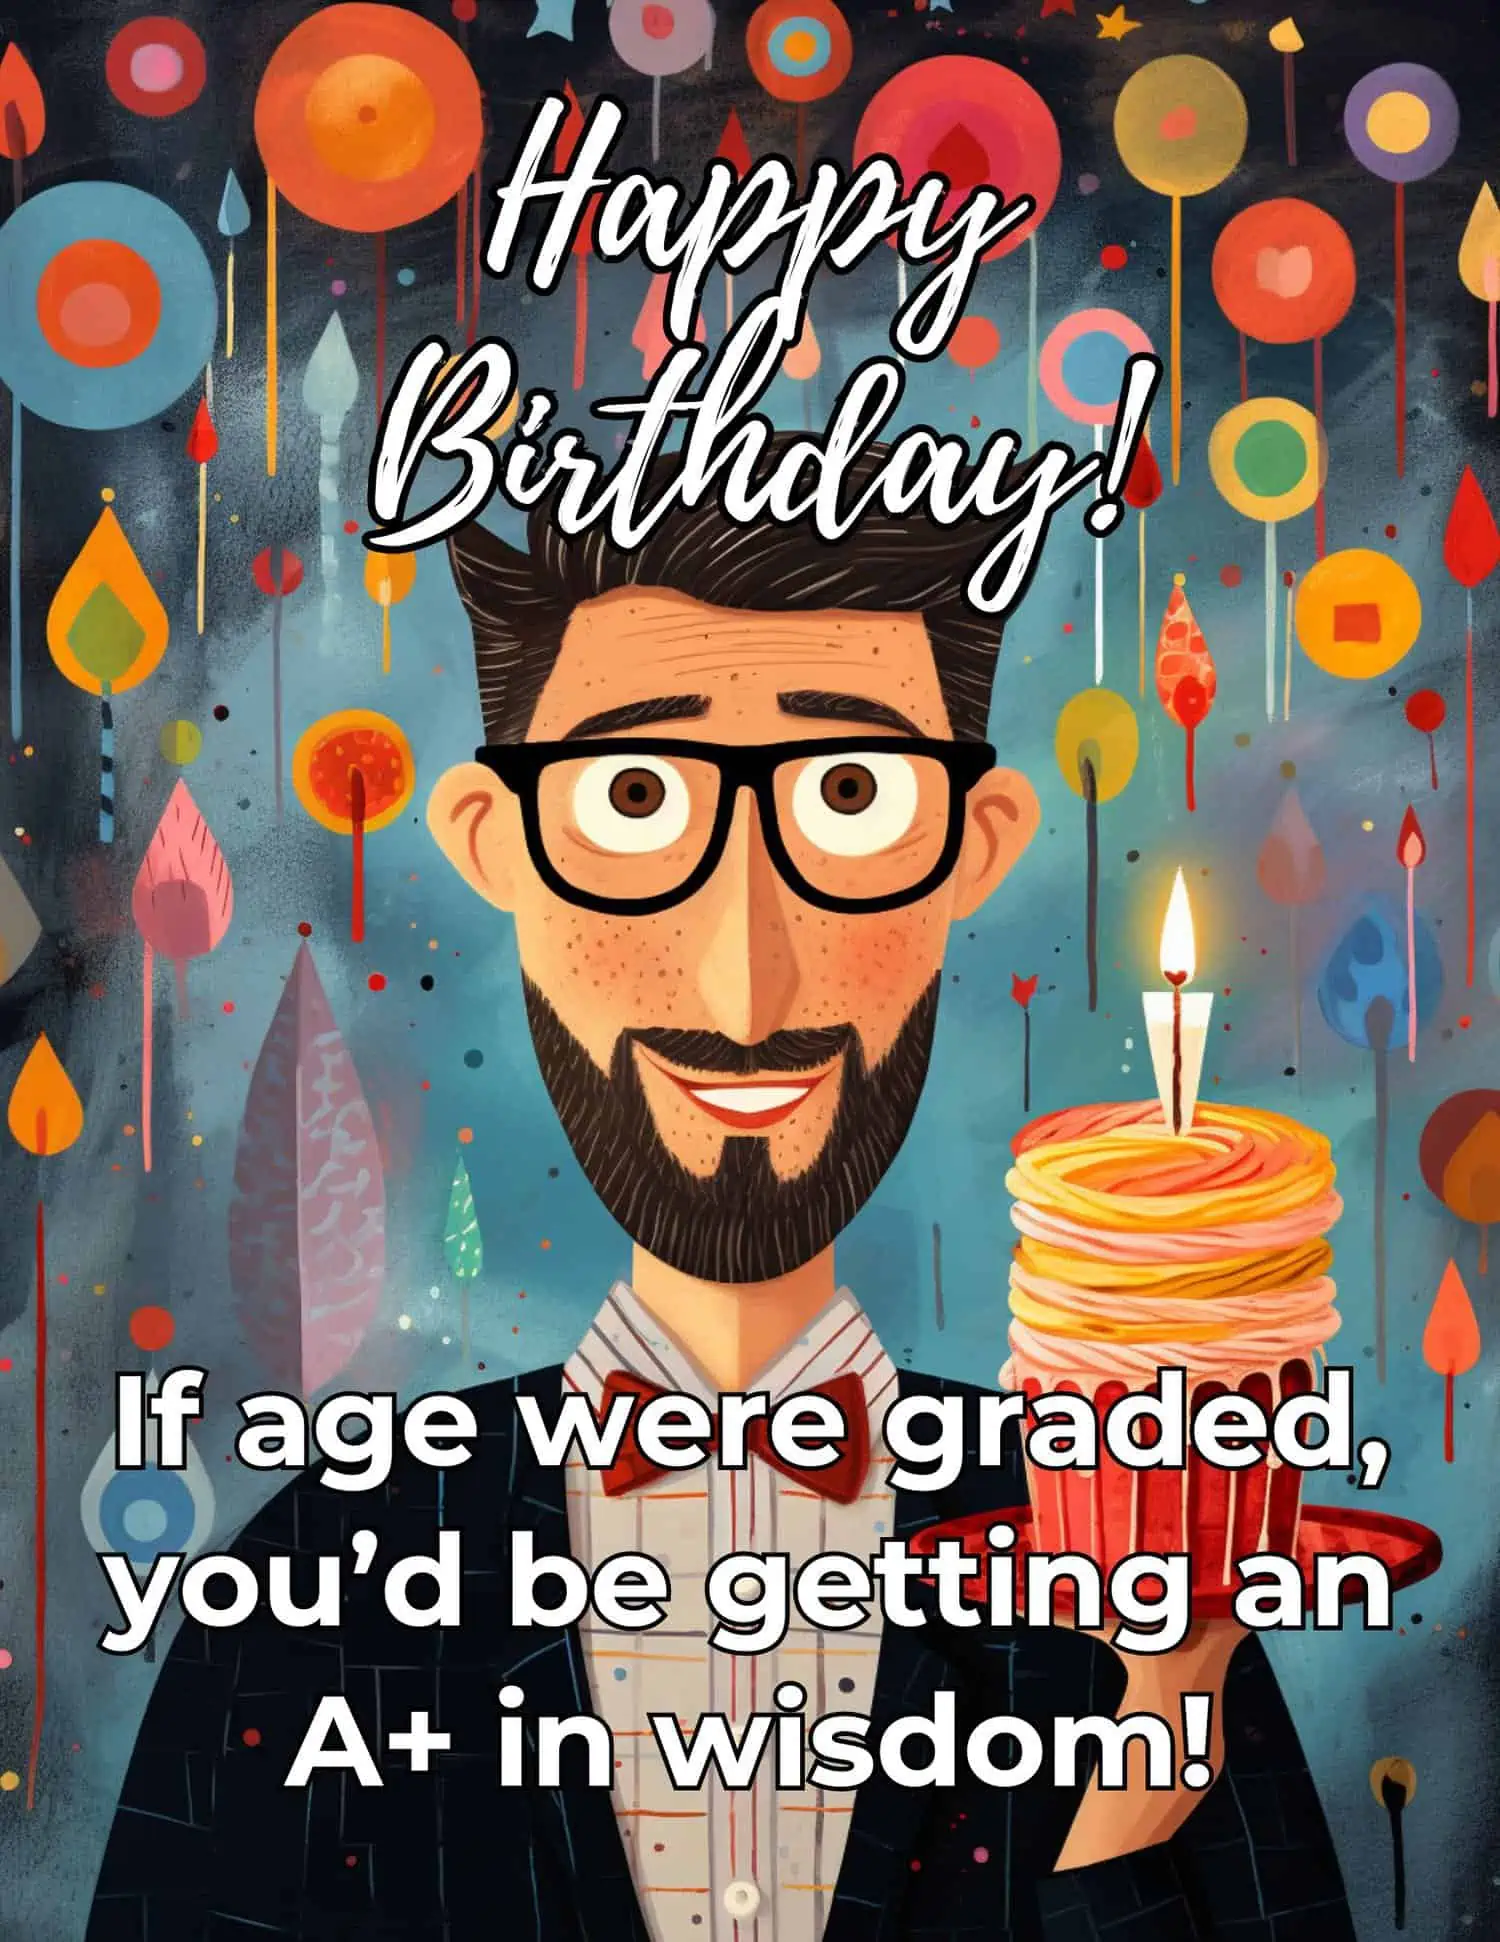 A collection of light-hearted and humorous birthday greetings tailored for educators.